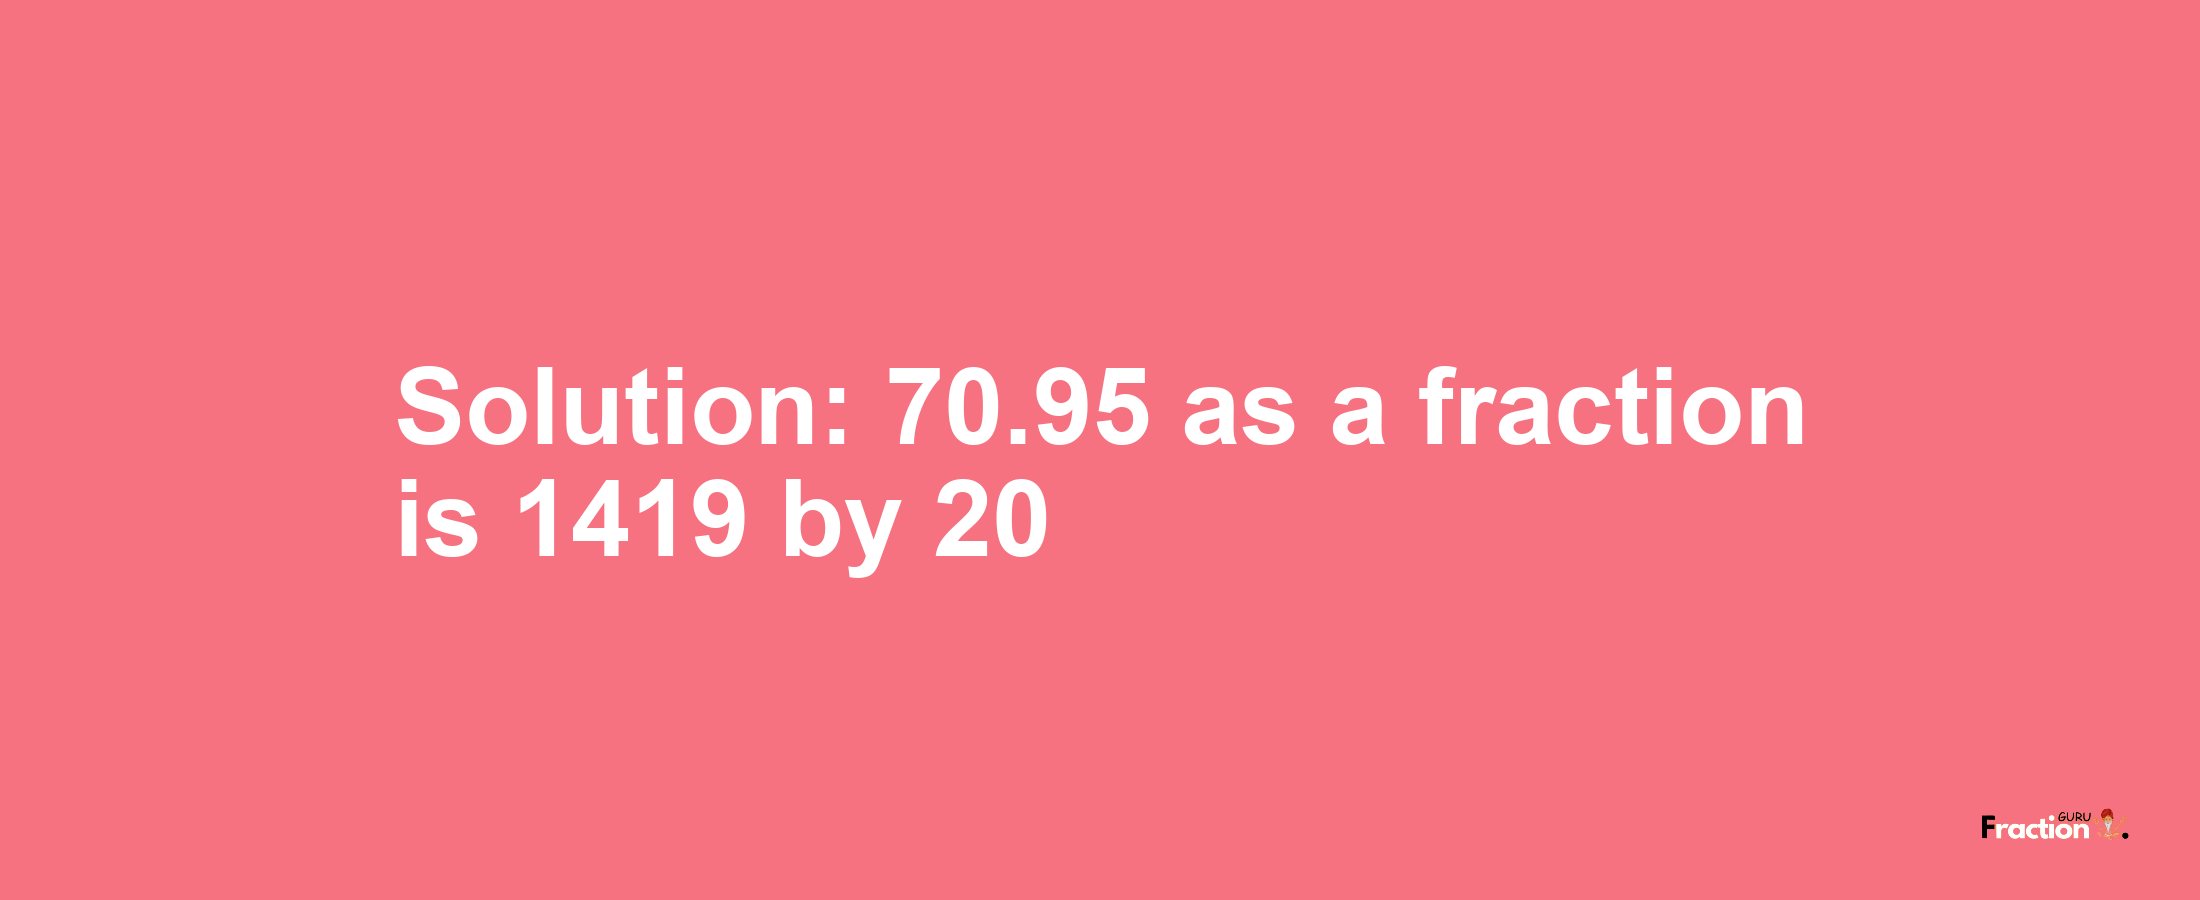 Solution:70.95 as a fraction is 1419/20